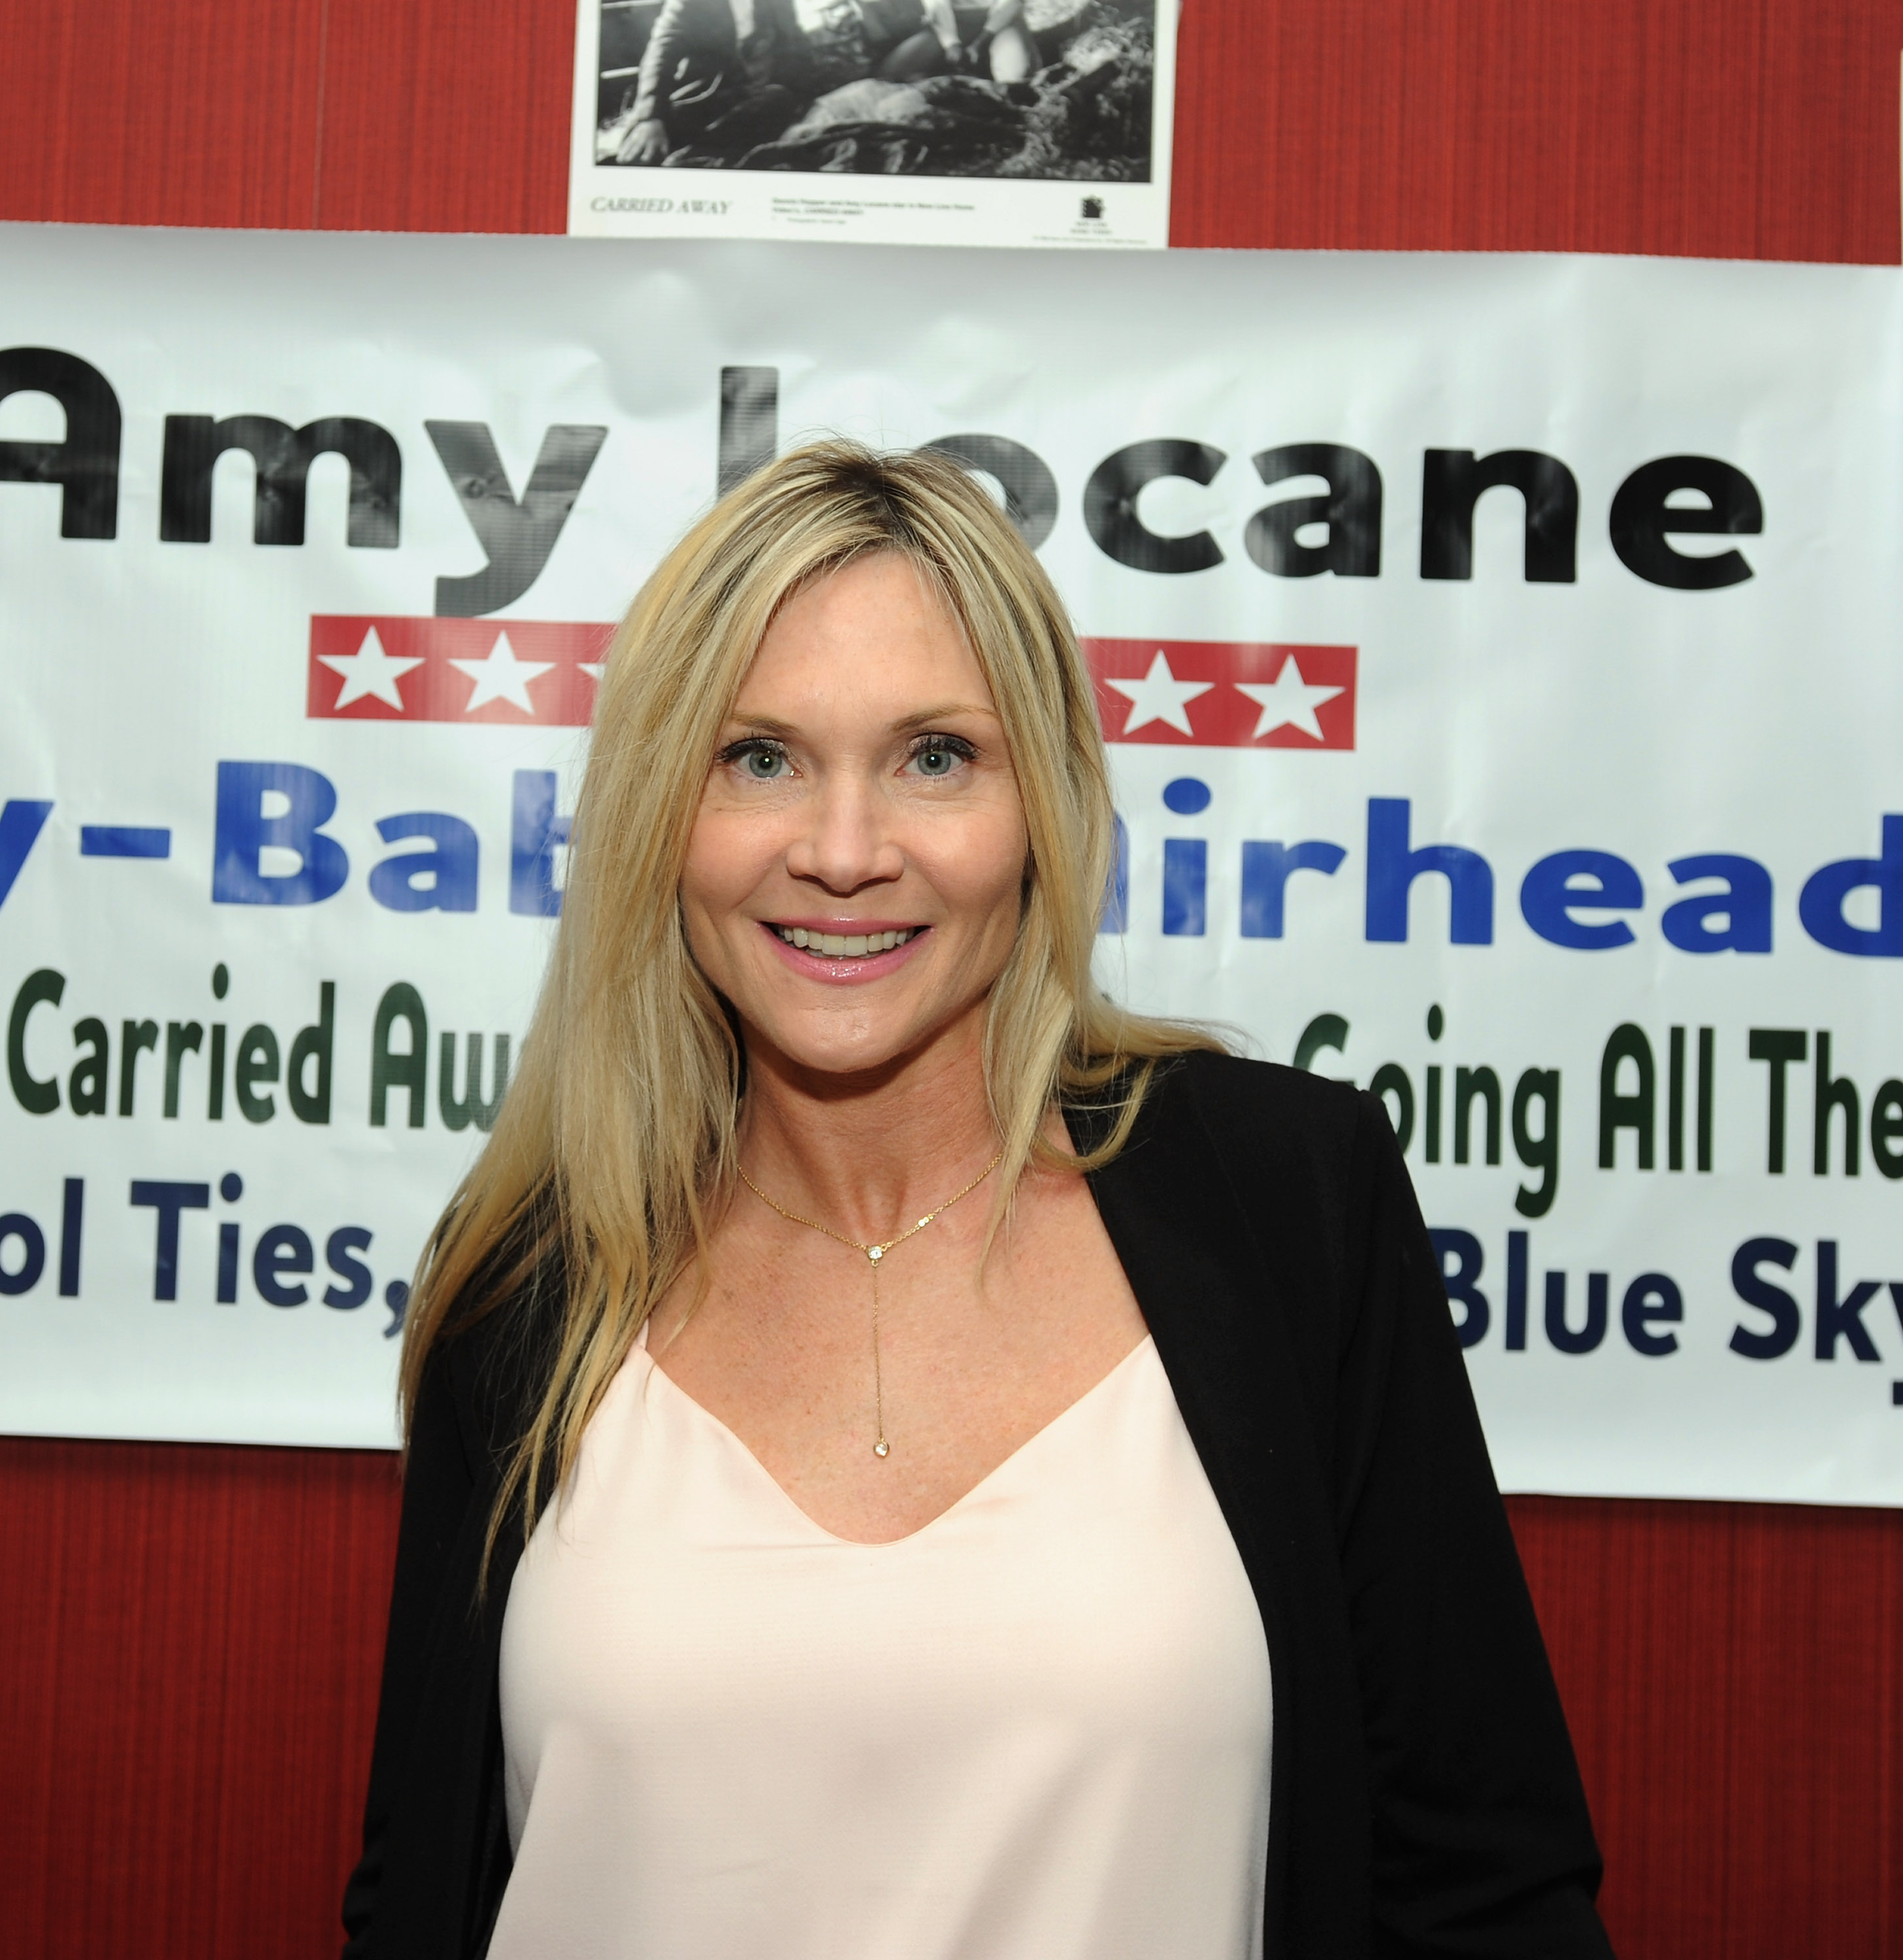 Amy Locane at the Horror Con & Film Festival in Iselin, New Jersey on March 2, 2018 | Source: Getty Images